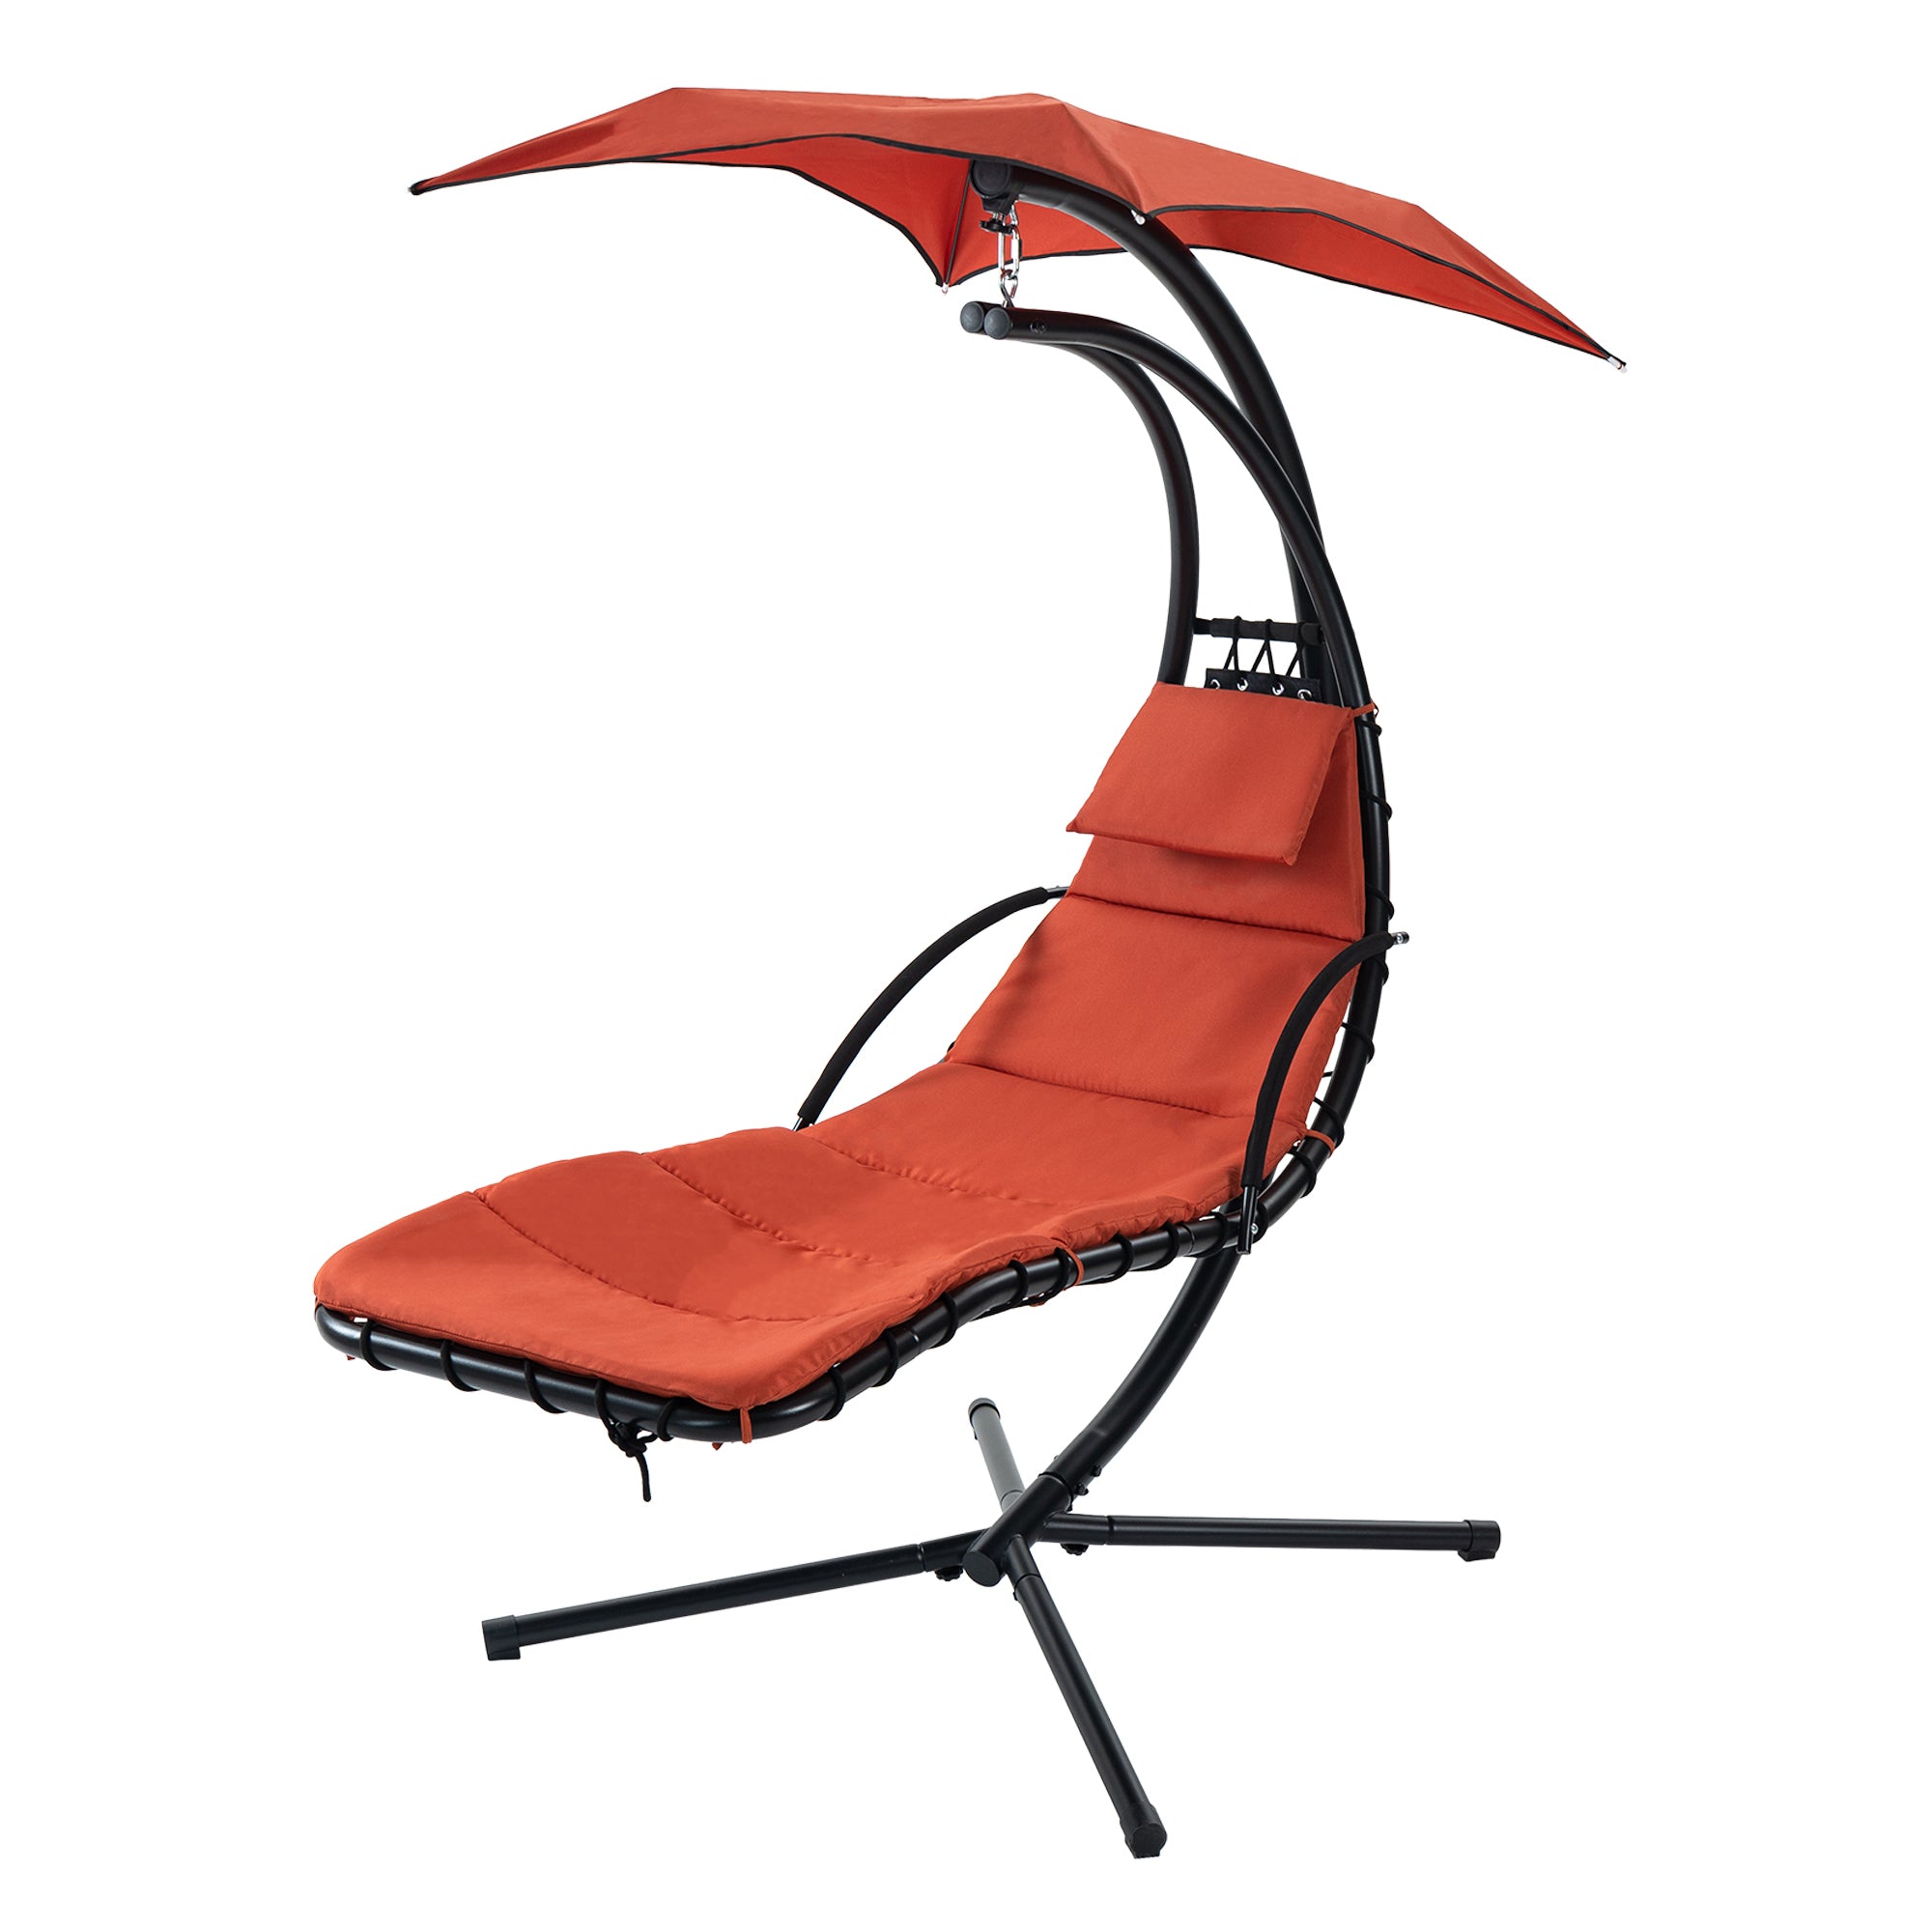 🆓🚛 Hanging Chaise Lounger With Removable Canopy, Outdoor Swing Chair With Built-In Pillow for Patio Porch Poolside, Hammock Chair With Stand, Orange